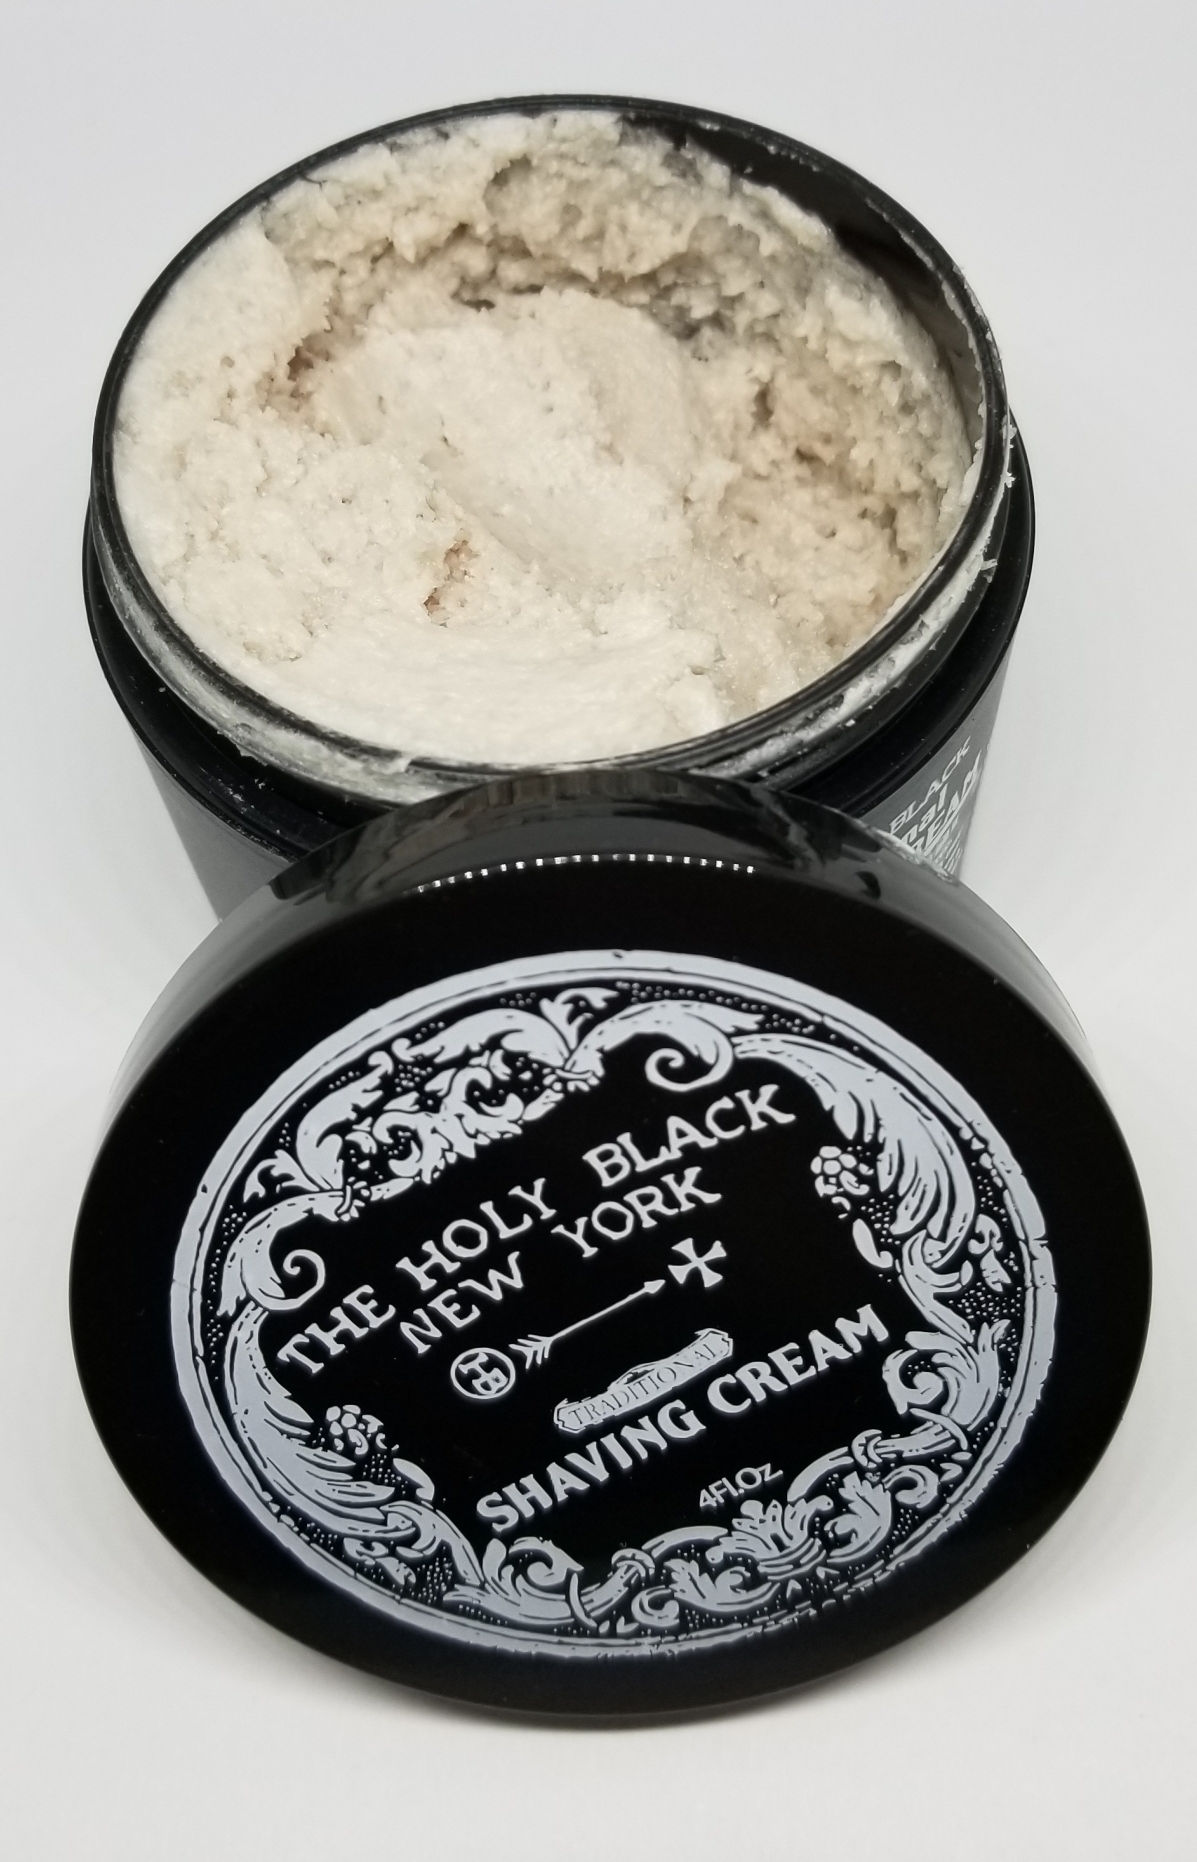 The Holy Black Shave Cream